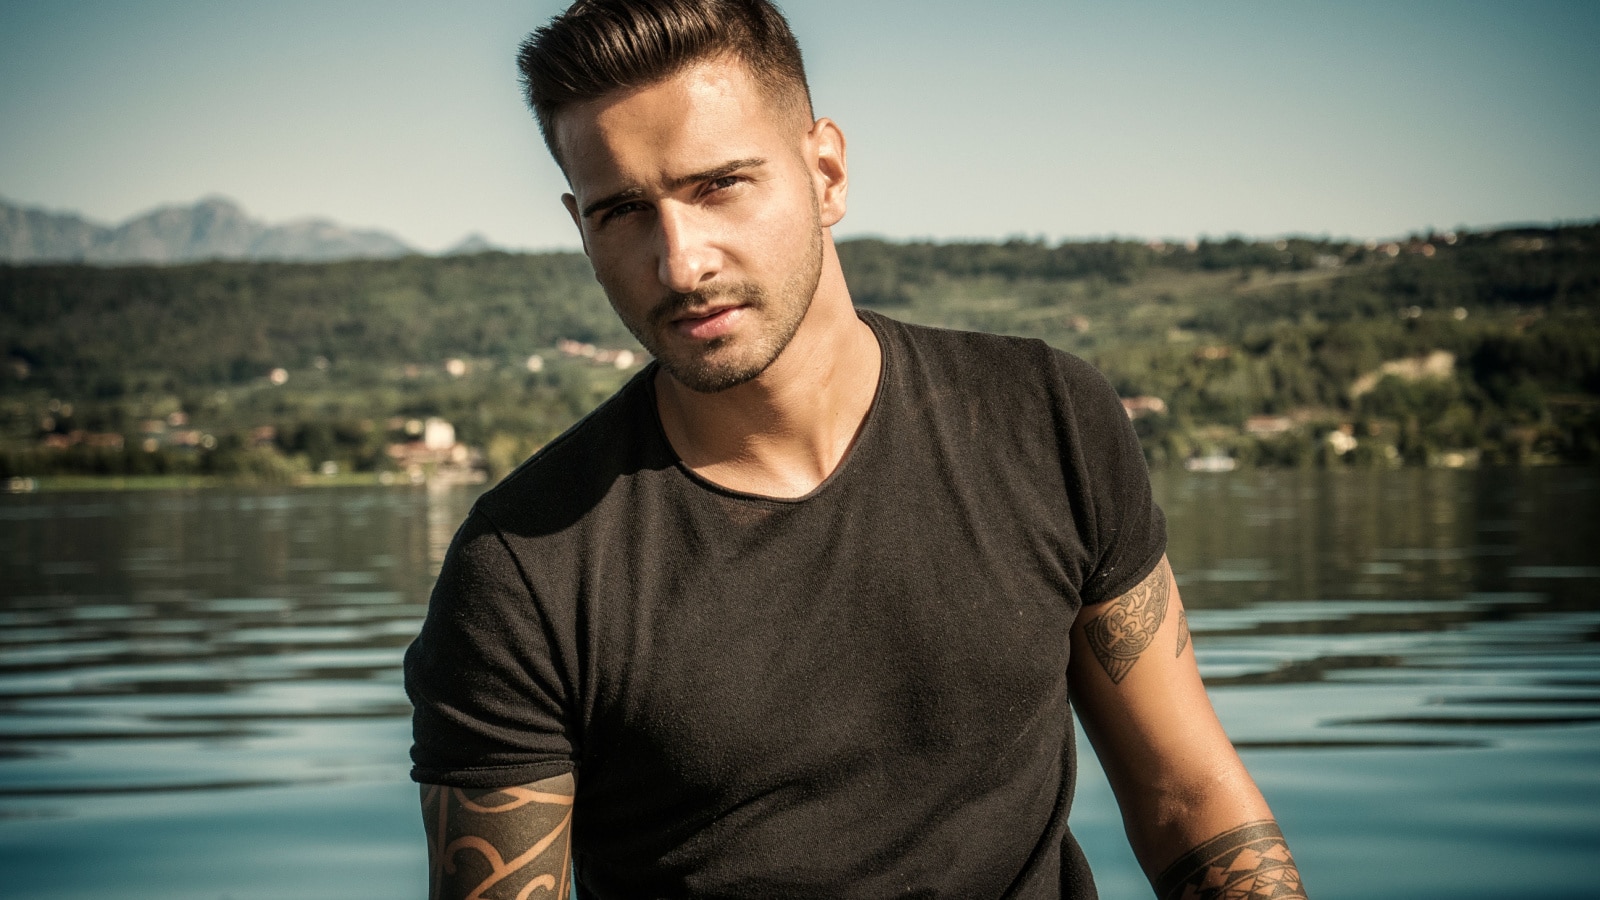 Attractive young athletic man standing in water in sea or lake, wearing black t-shirt